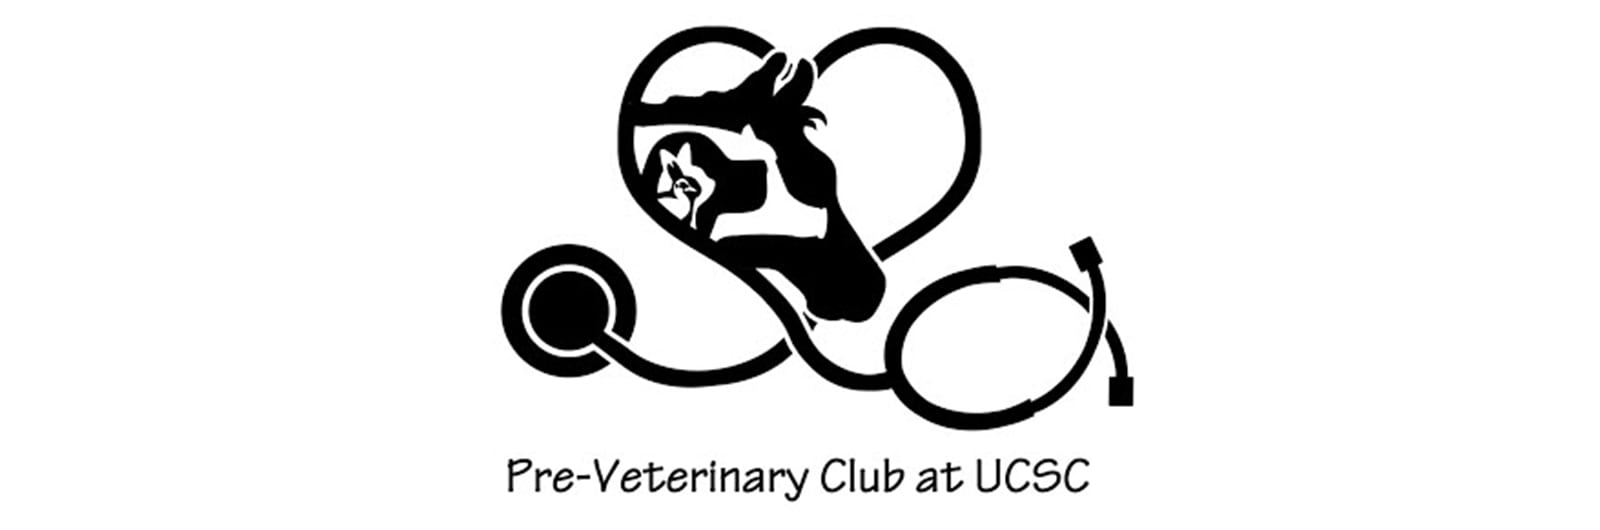 Banner shows a black-and-white graphic of animals surrounded by a heart-shaped stethoscope. Text reads "Pre-Veterinary Club at UCSC"